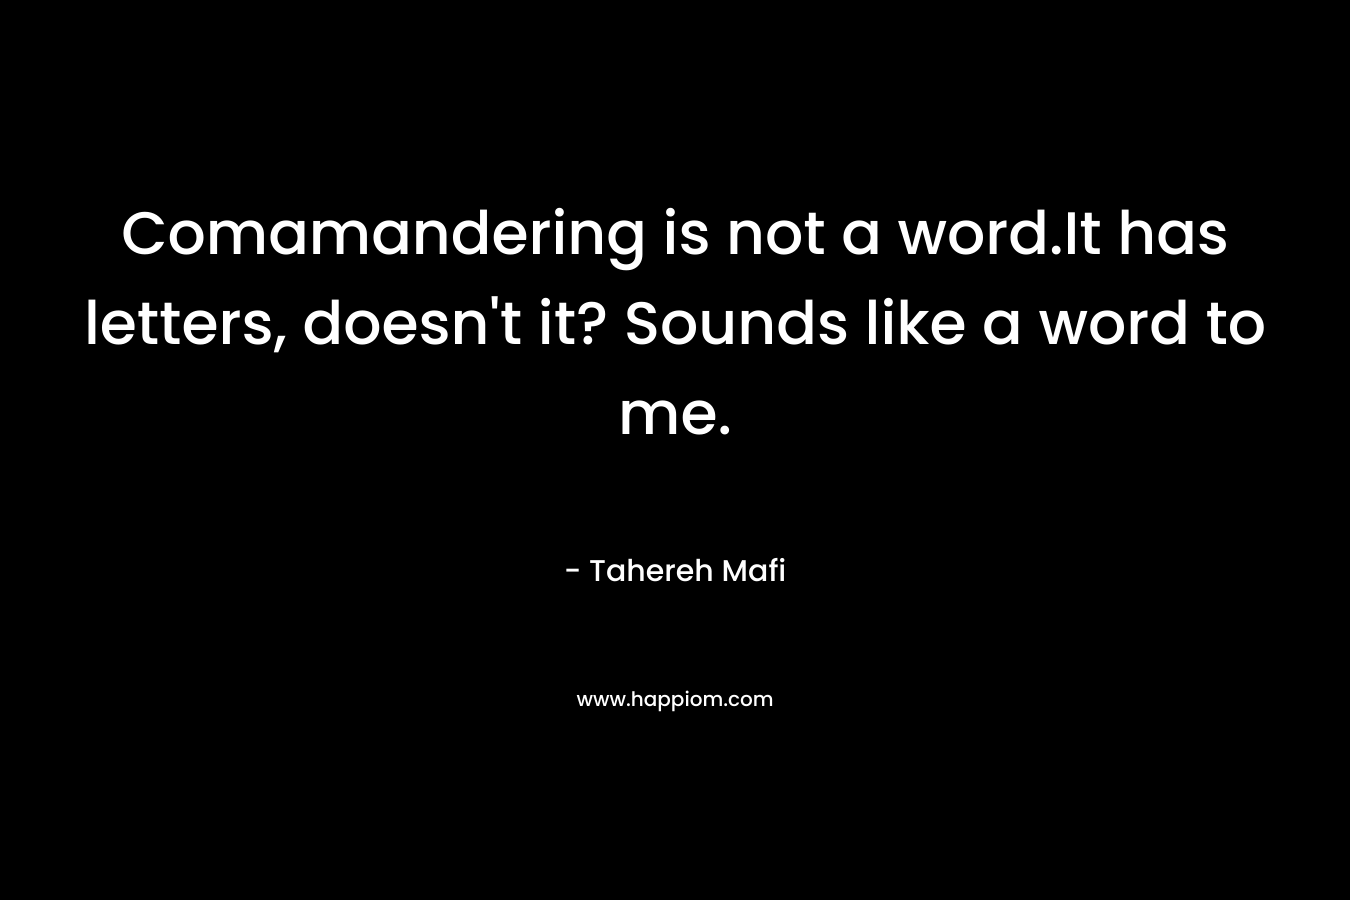 Comamandering is not a word.It has letters, doesn't it? Sounds like a word to me.